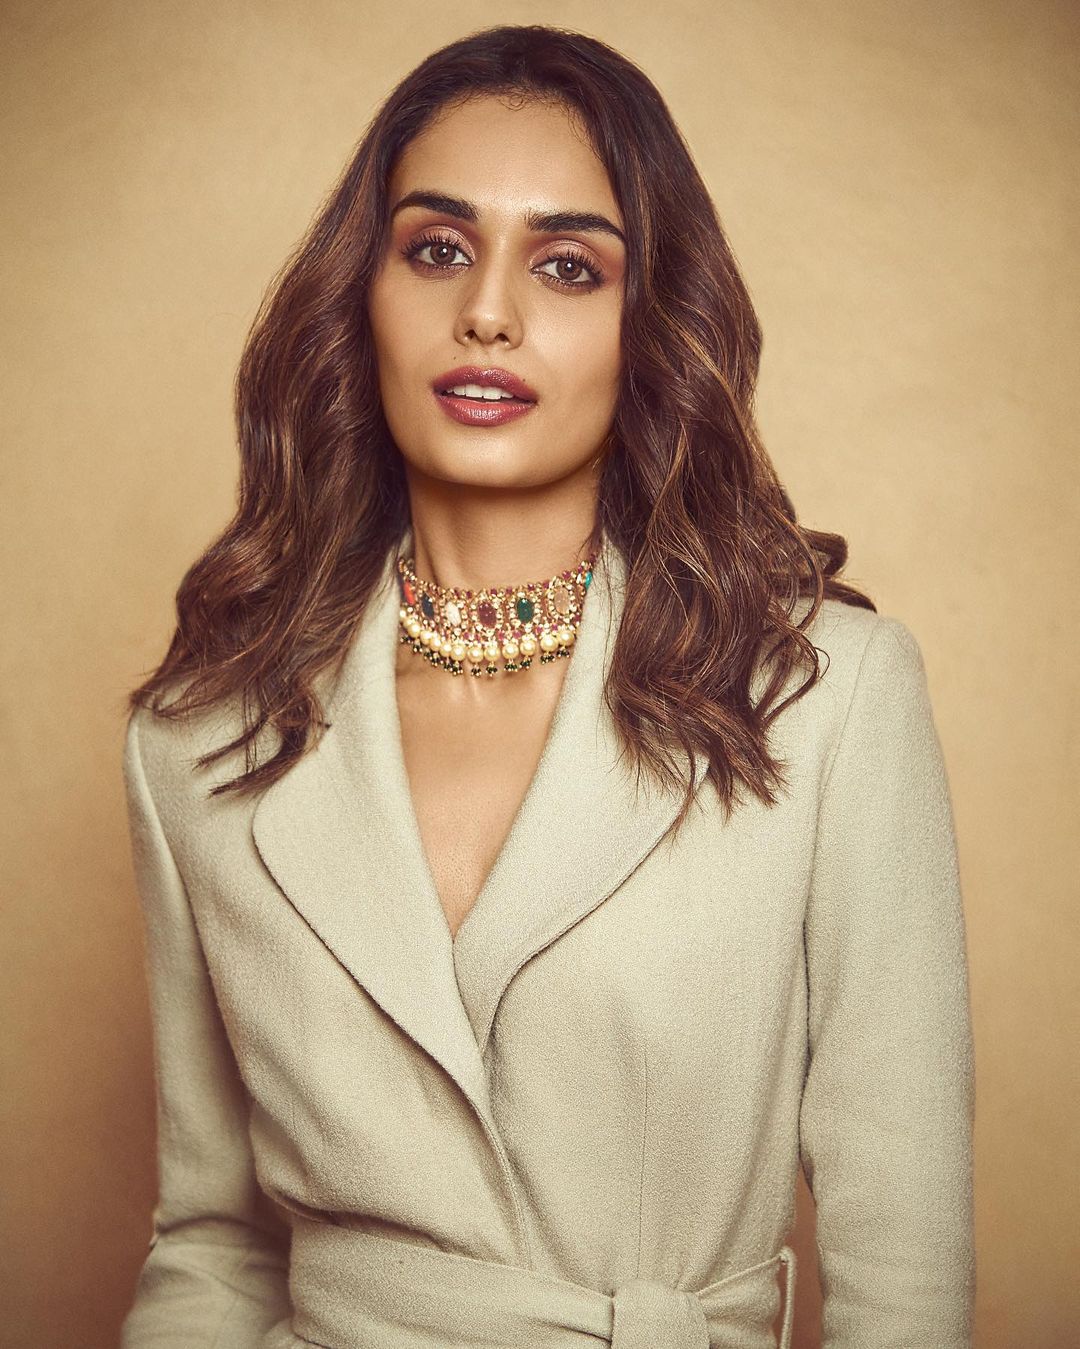 Watch this stylish and hot pictures of actress manushi chhillar-@manushichhillar, Manushichhillar, Actressmanushi Photos,Spicy Hot Pics,Images,High Resolution WallPapers Download